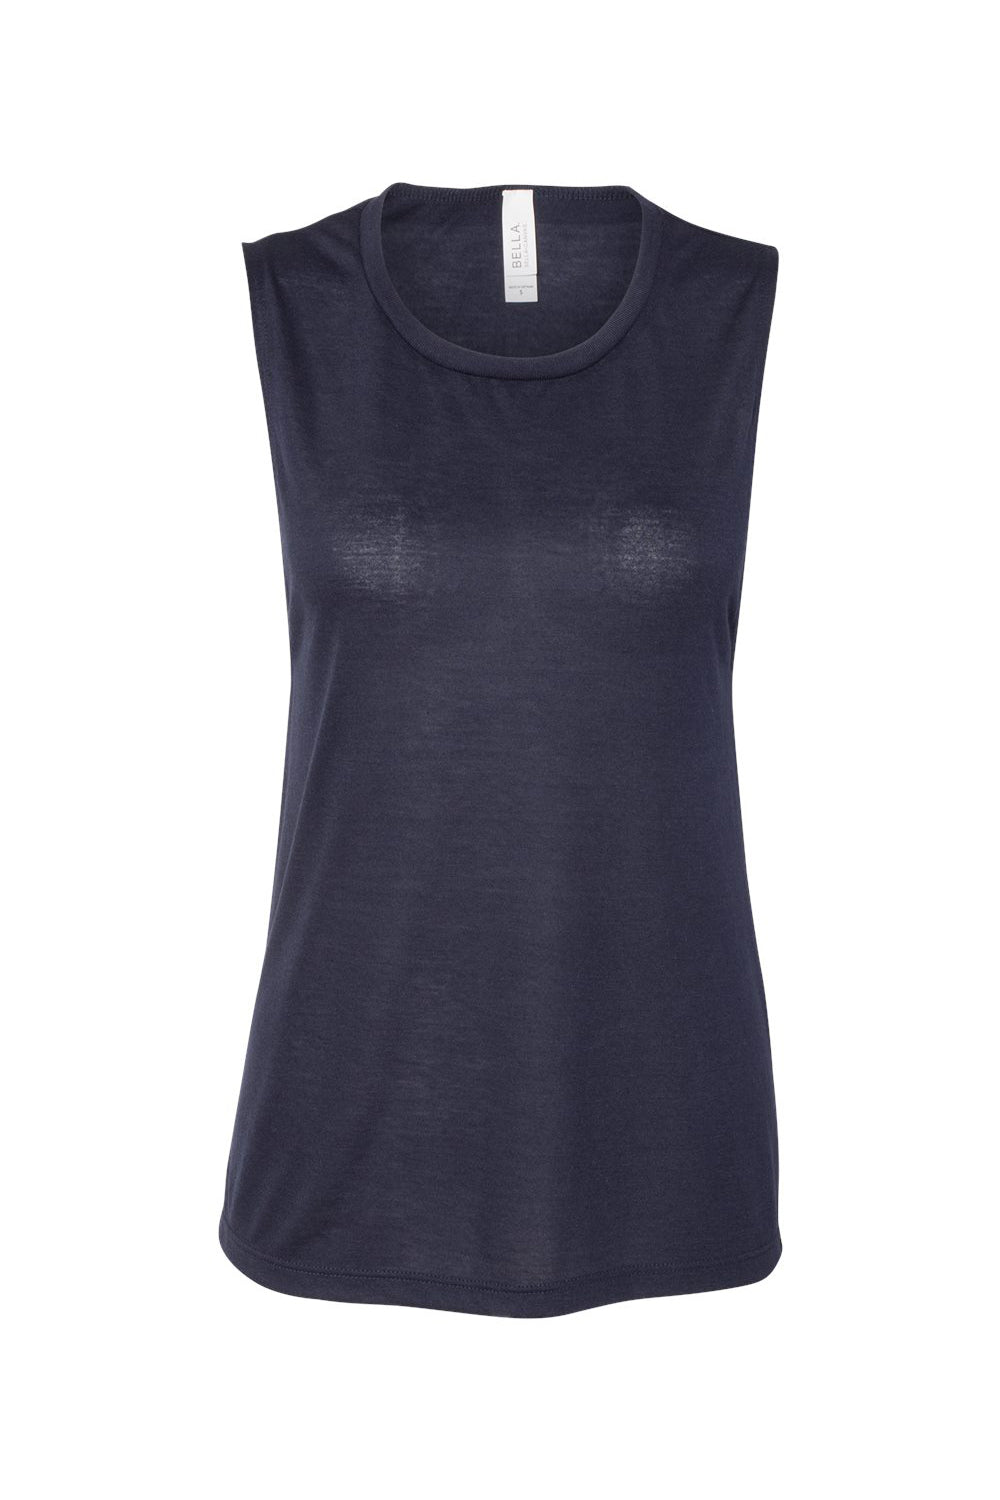 Bella + Canvas BC8803/B8803/8803 Womens Flowy Muscle Tank Top Midnight Blue Flat Front